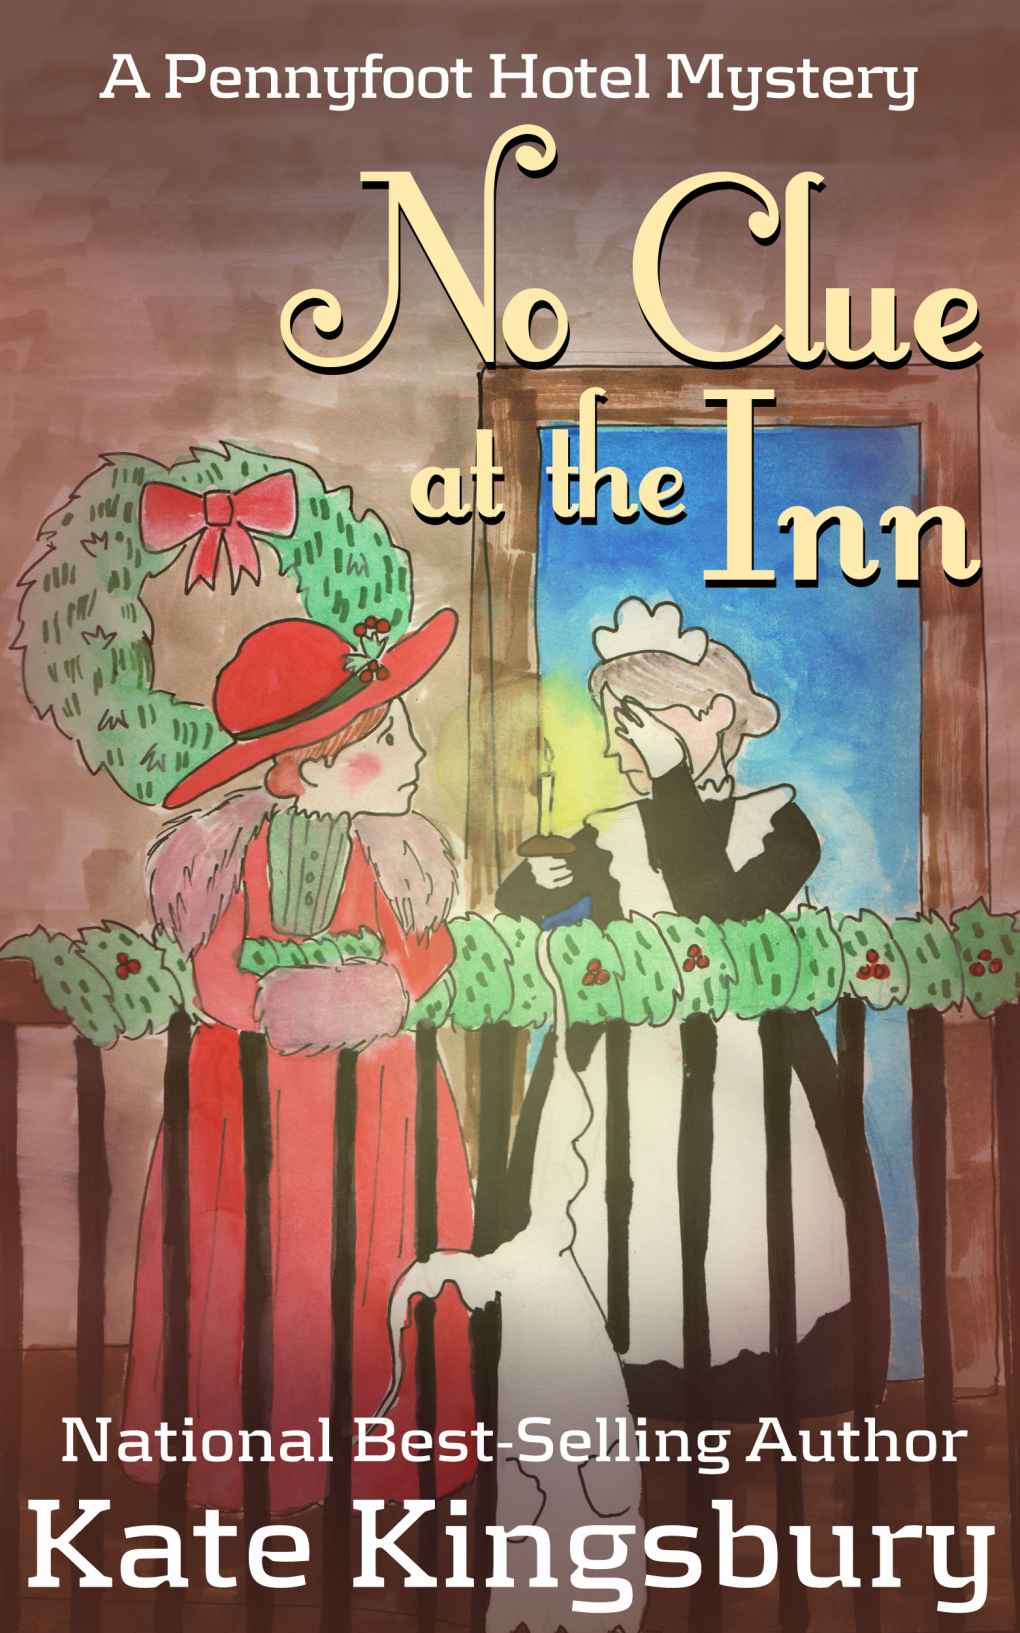 No Clue at the Inn (Pennyfoot Hotel Mystery Book 13) by Kate Kingsbury